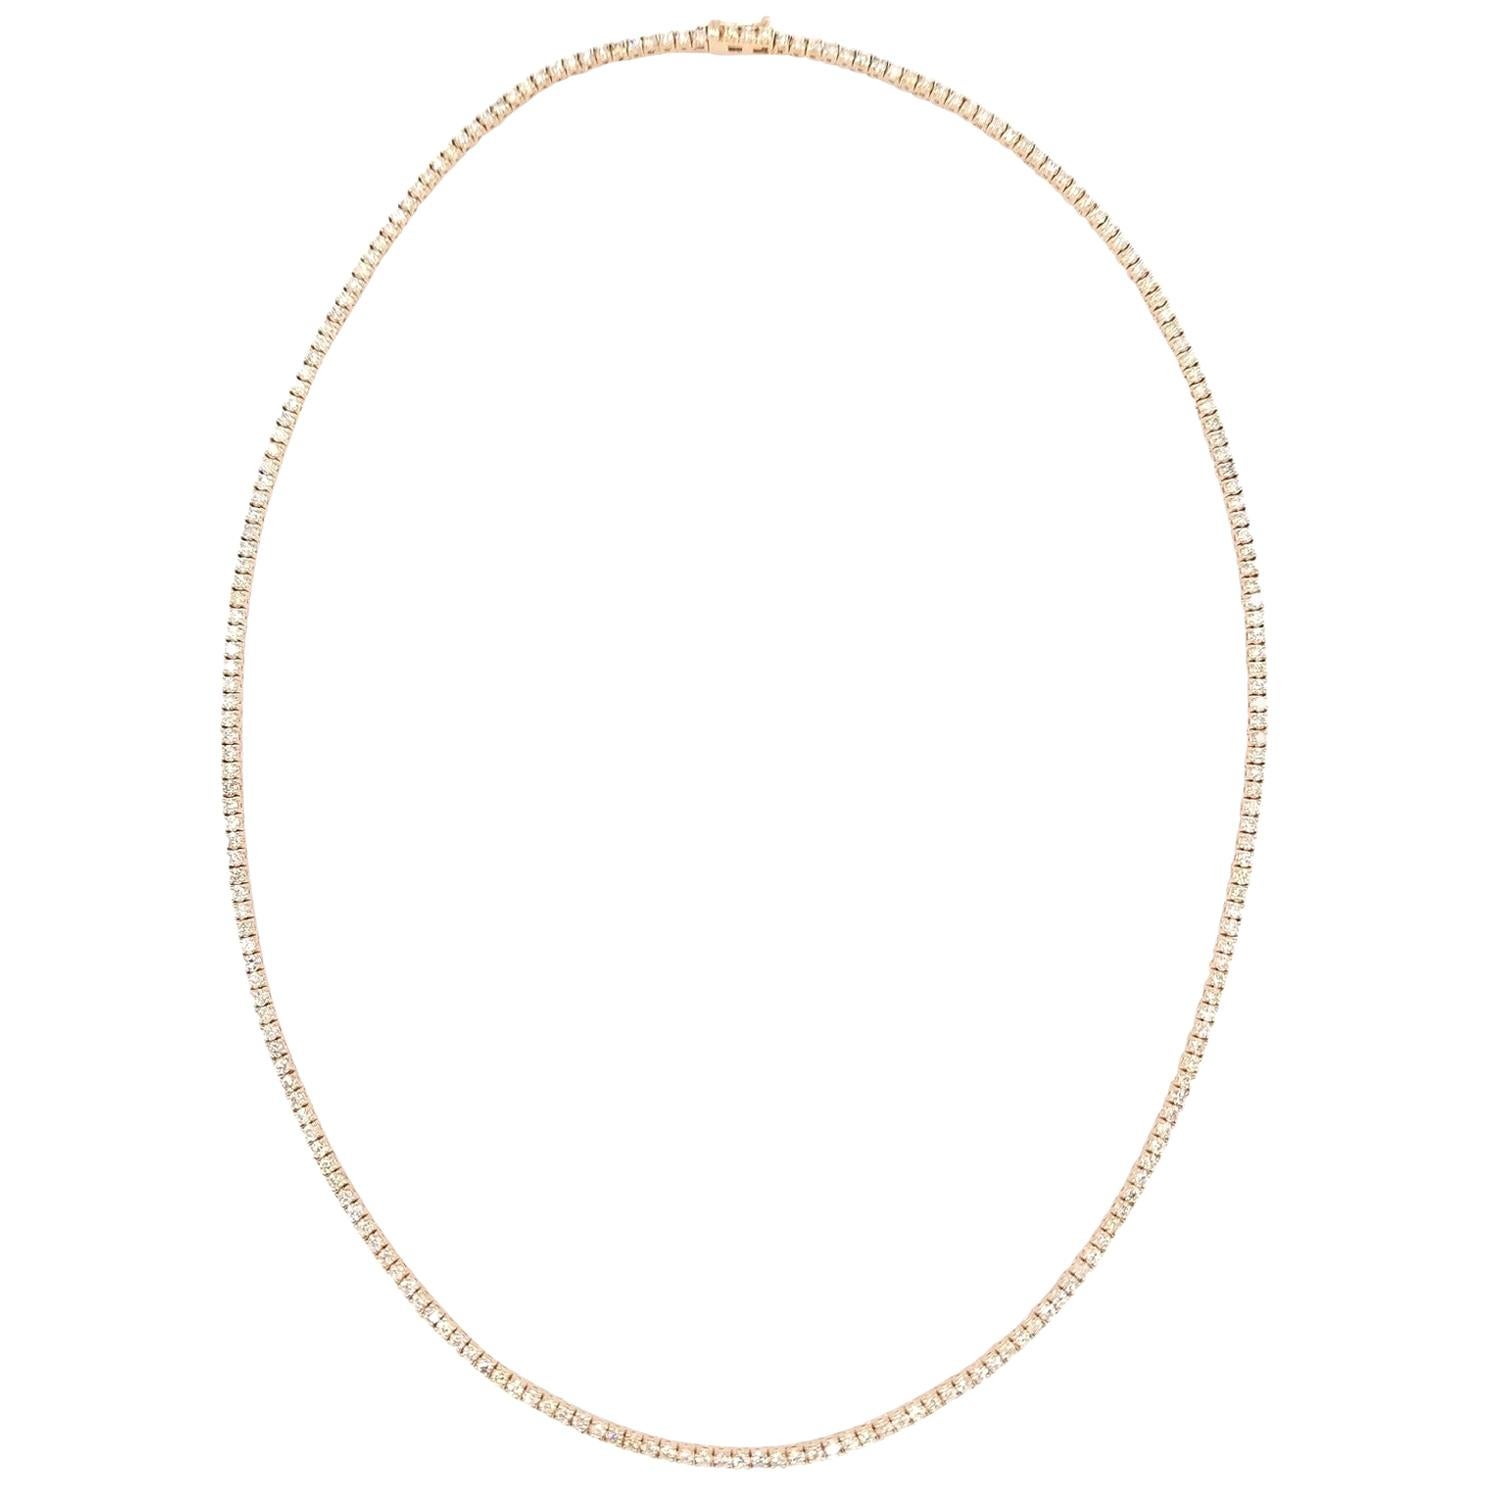 Brilliant and beautiful tennis necklace, natural round-brilliant cut white diamonds clean and Excellent shine. 14k rose gold classic four-prong style for maximum light brilliance. 23 inch length. Average H-I Color, VS-SI Clarity. 2.1 mm. Elegance